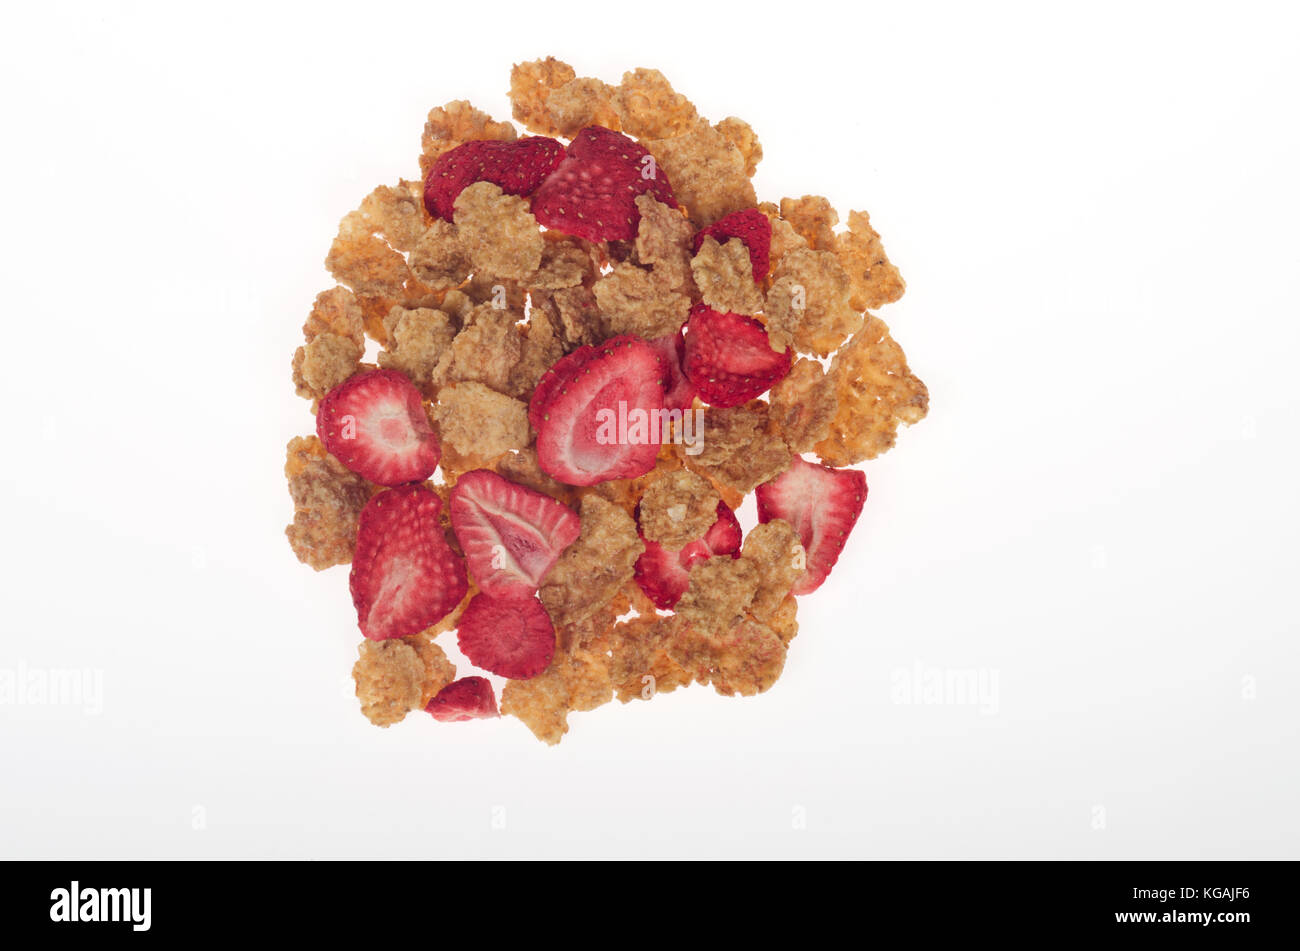 Kellogg's Special K with red berries cereal isolated on white background Stock Photo